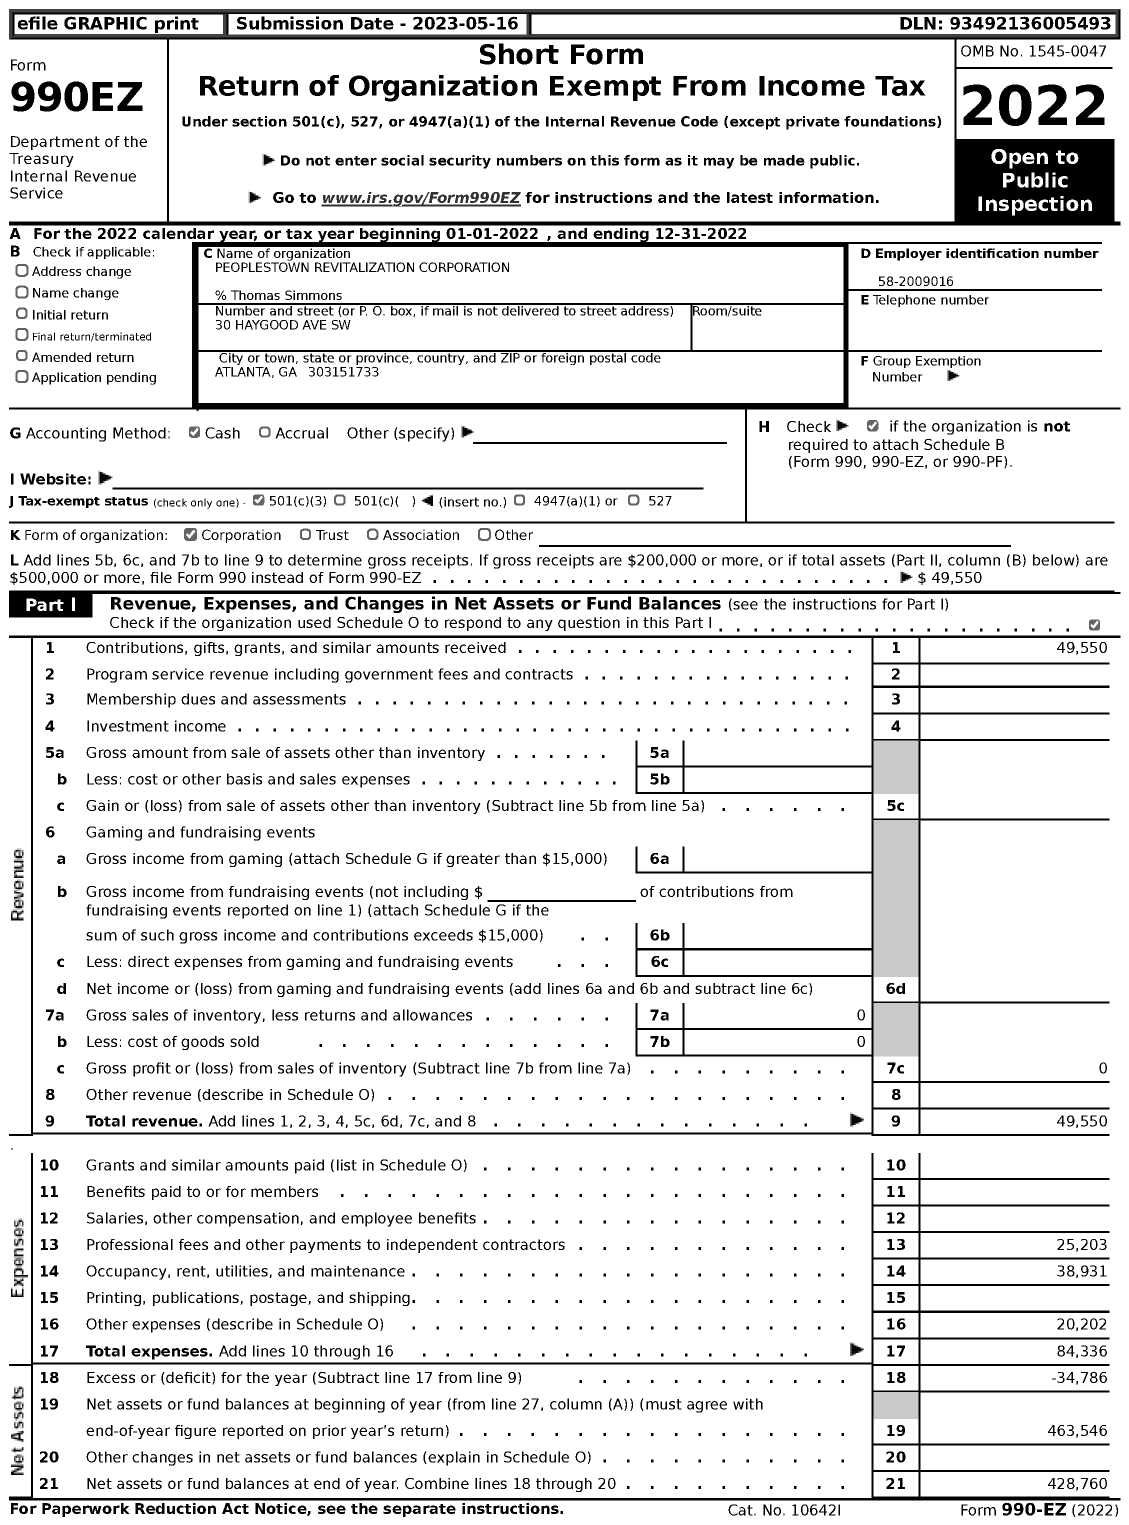 Image of first page of 2022 Form 990EZ for Peoplestown Revitalization Corporation